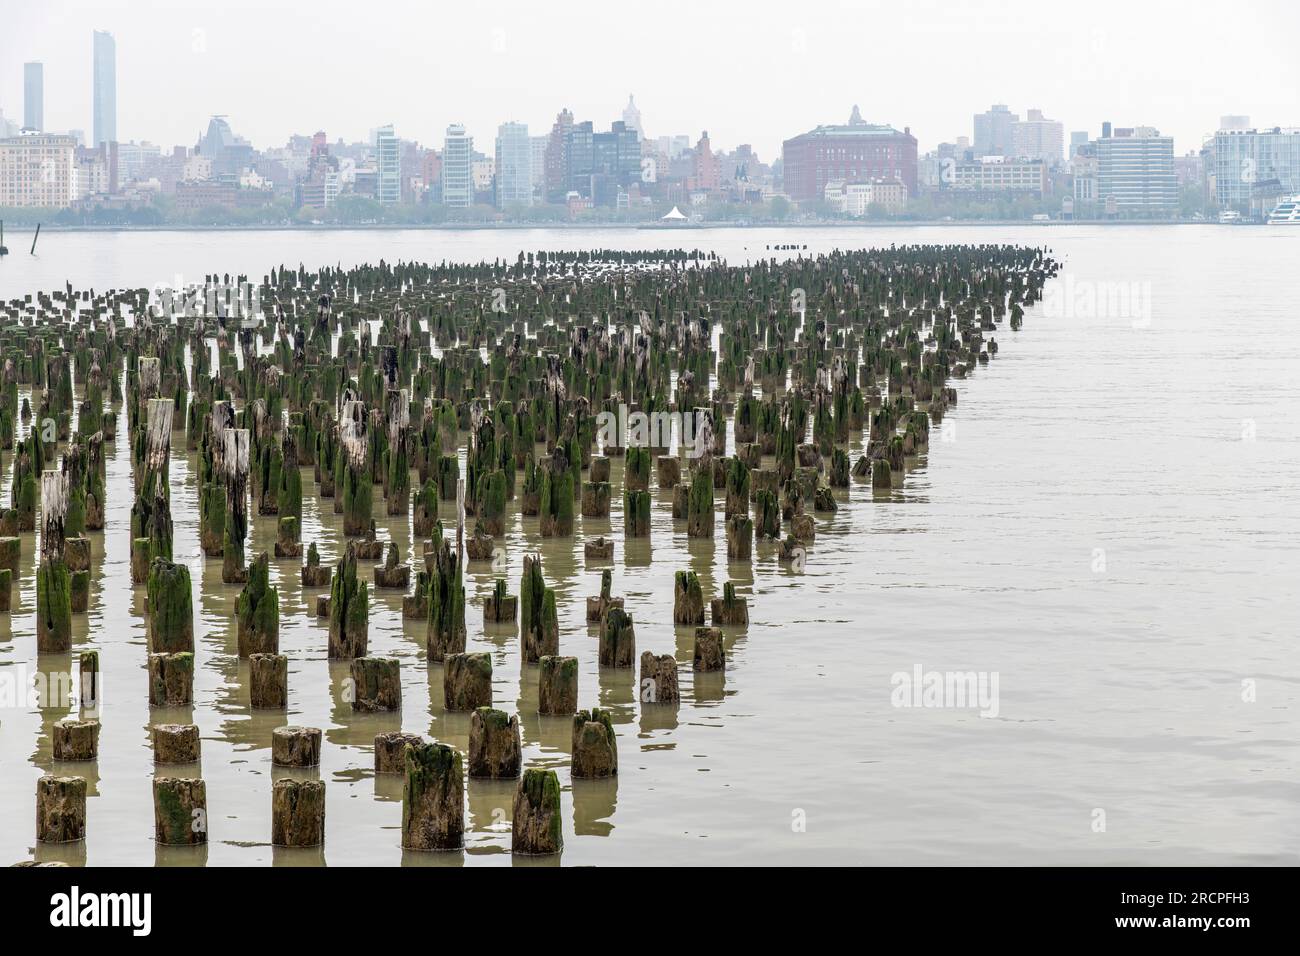 Panoramic view of over hundreds of old wooden pier supports in the Hudson River on New Jersey side with vanishing point perspective towards Manhattan Stock Photo